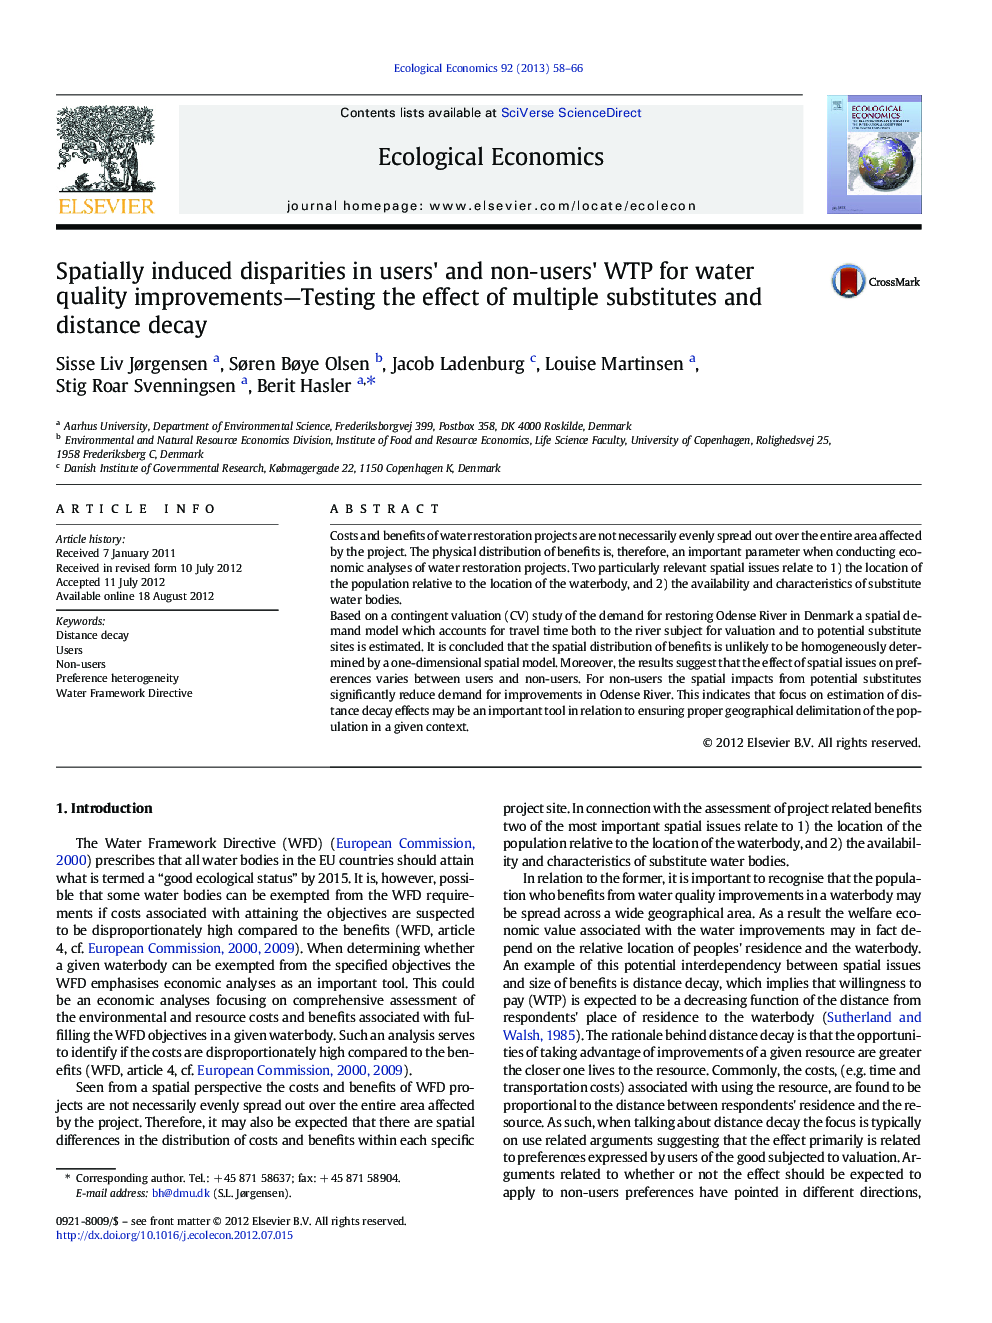 Spatially induced disparities in users' and non-users' WTP for water quality improvements-Testing the effect of multiple substitutes and distance decay